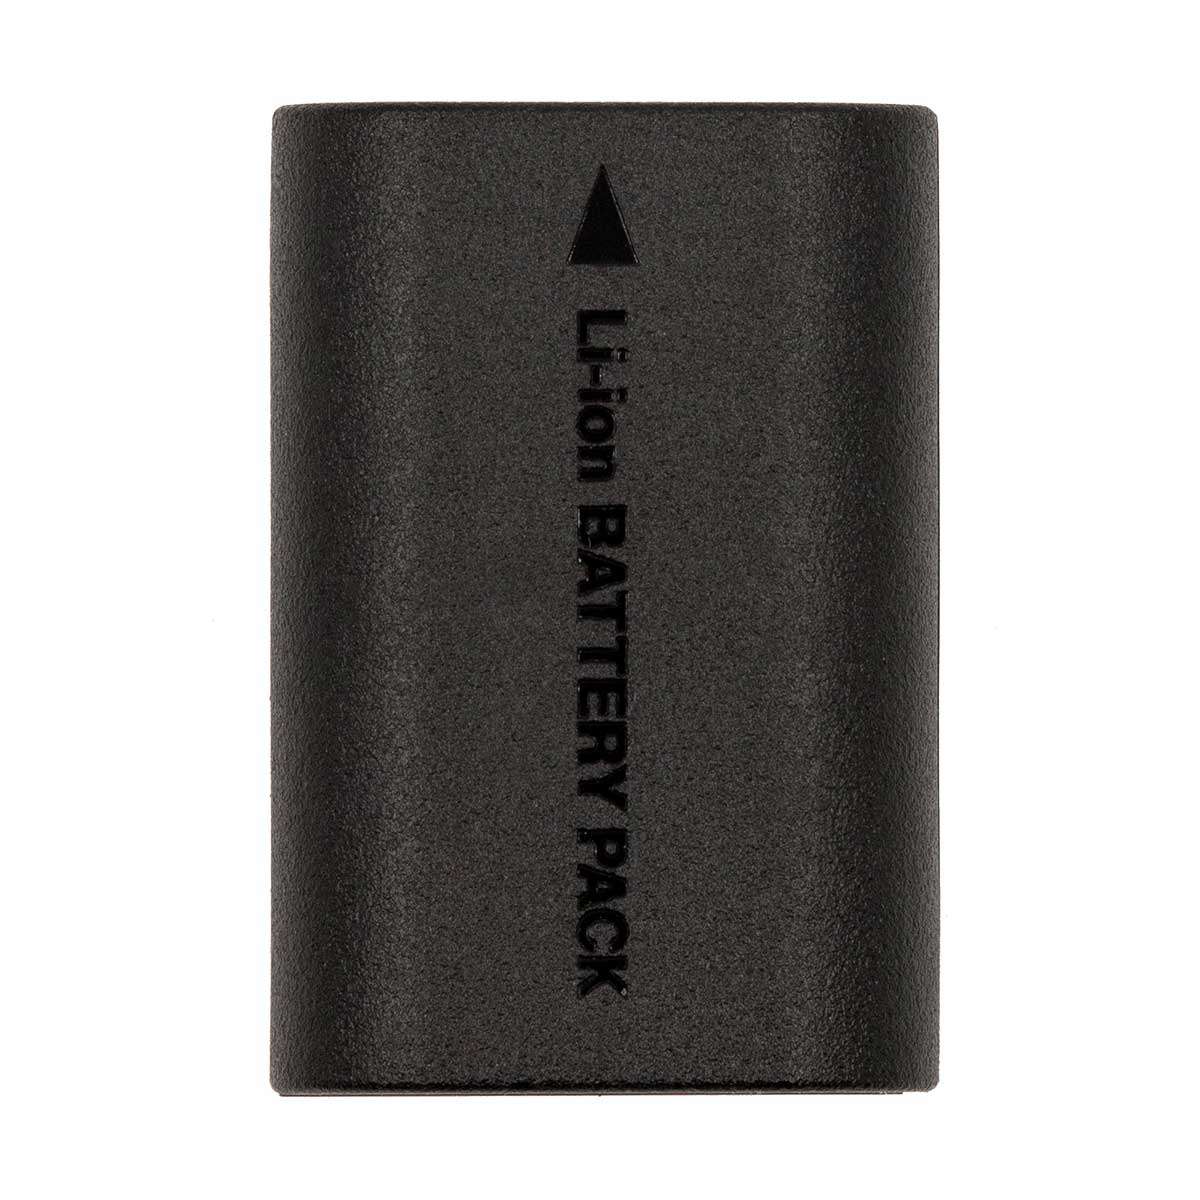 ProMaster LP-E6NH Battery Pack for Canon